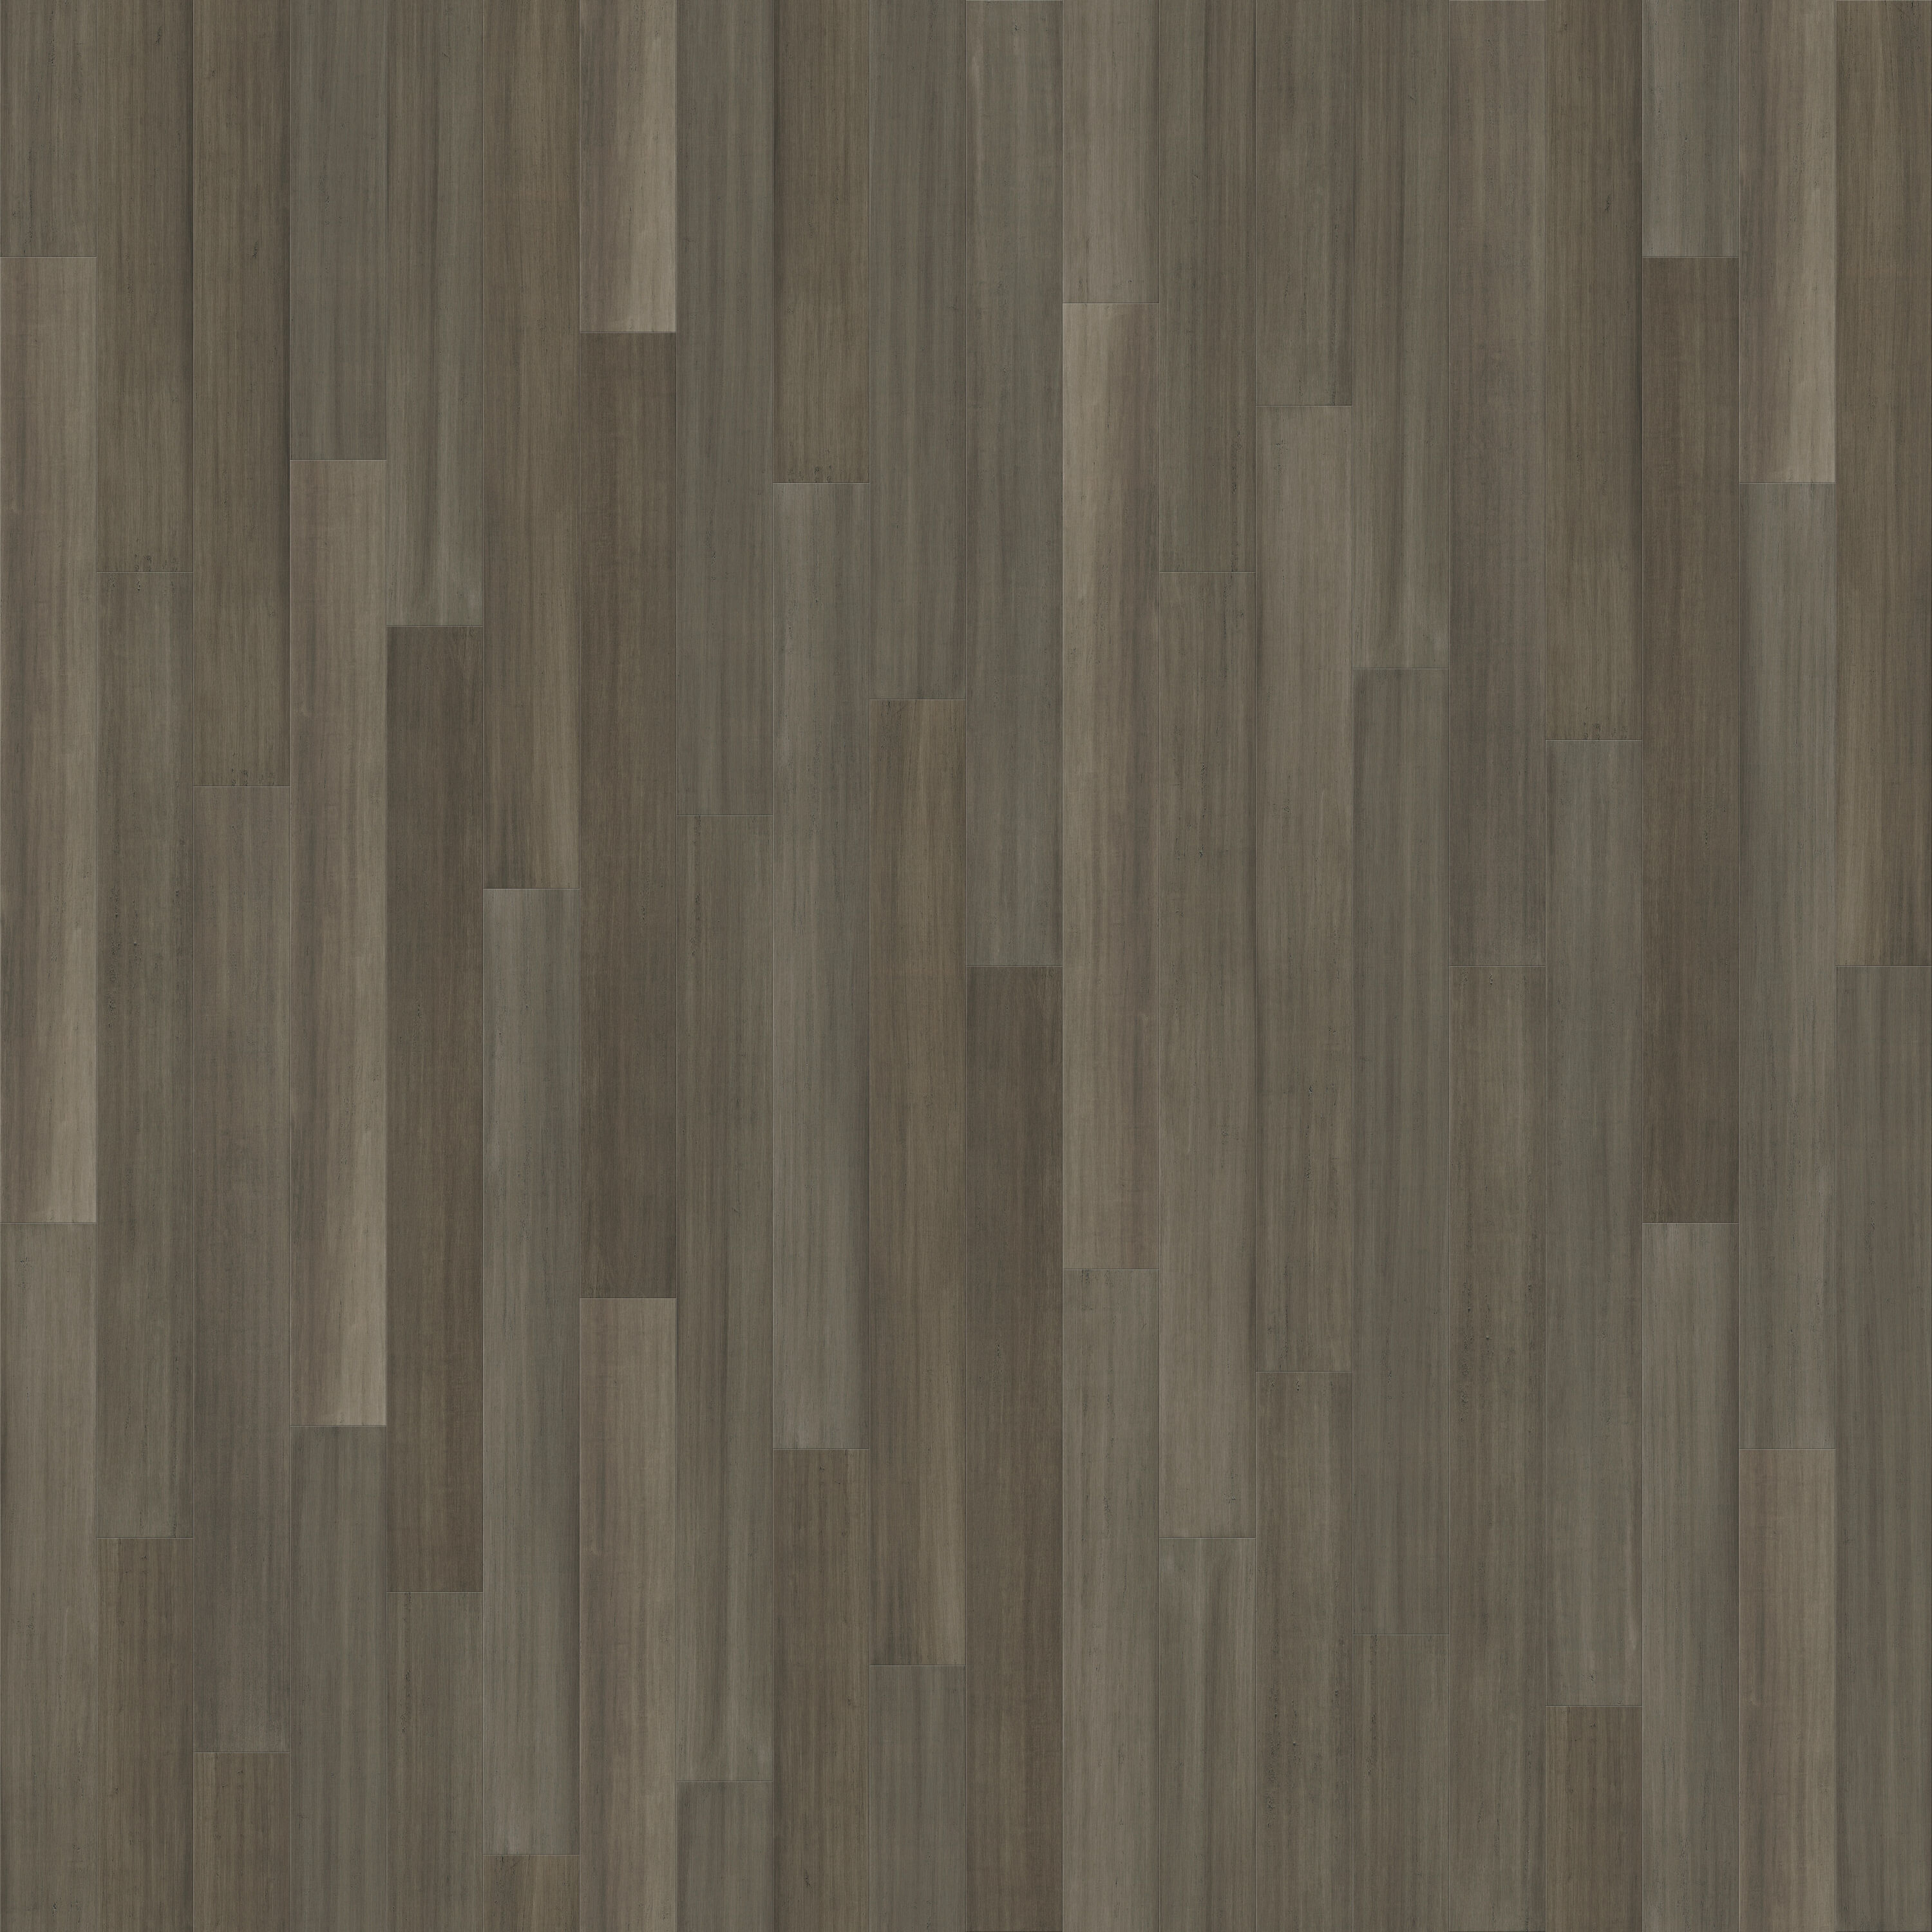 CALI Bamboo (Engineered) Regatta Bamboo 5-5/16-in W x 9/16-in T x 72-in Smooth/Traditional Engineered Hardwood Flooring (21.5-sq ft) in Brown -  7014009600